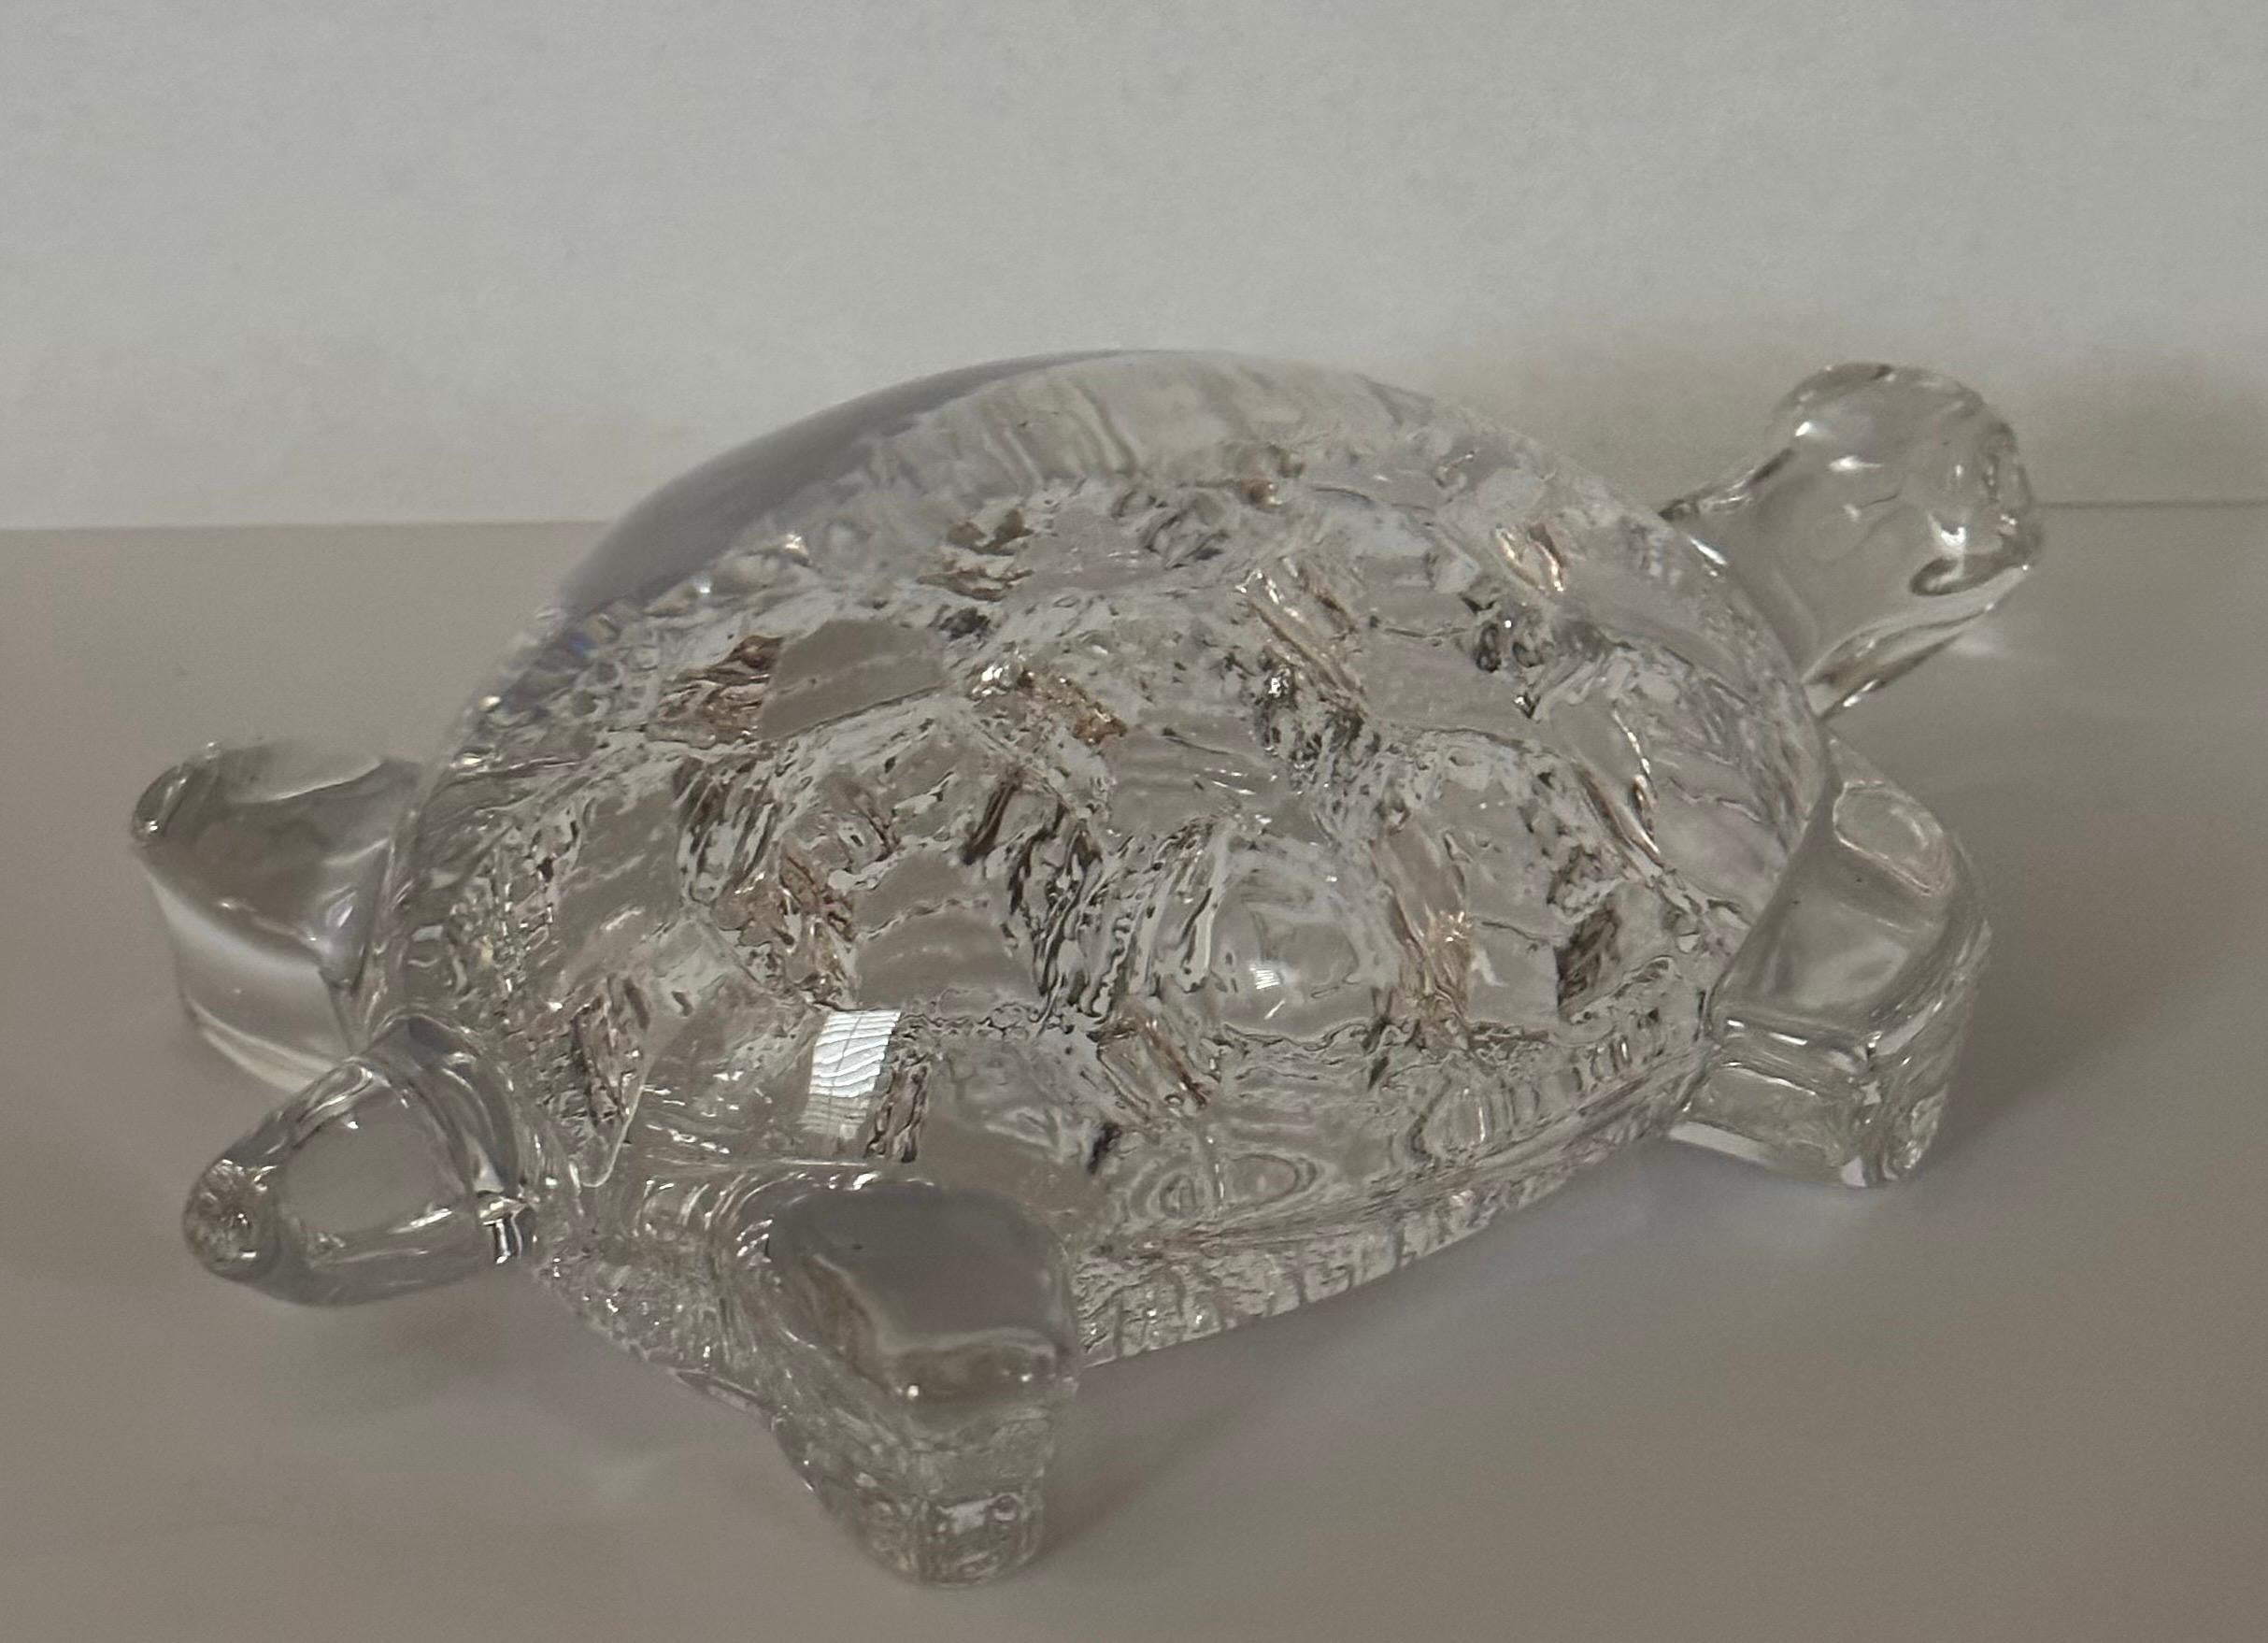 French Stylized Crystal Turtle Sculpture / Paperweight by Daum France